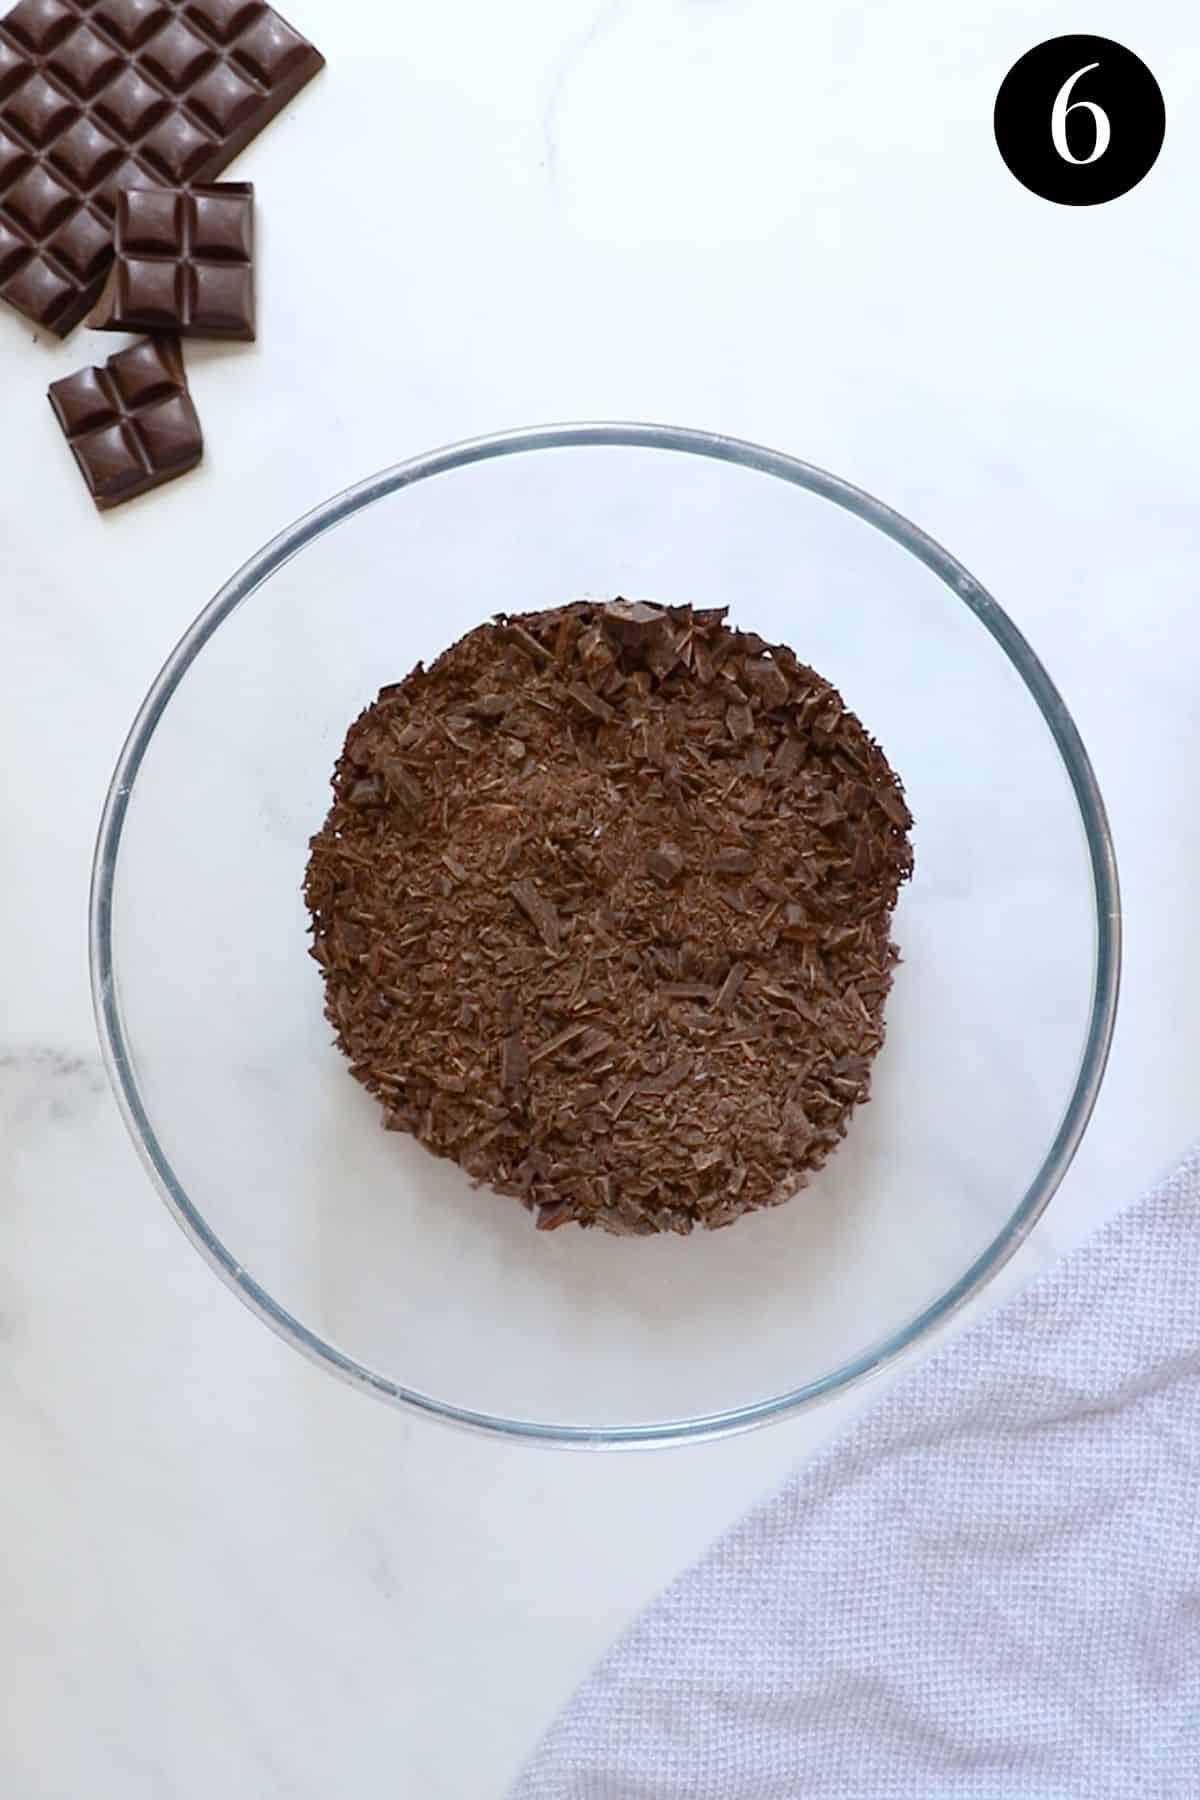 finely chopped dark chocolate in a glass bowl.